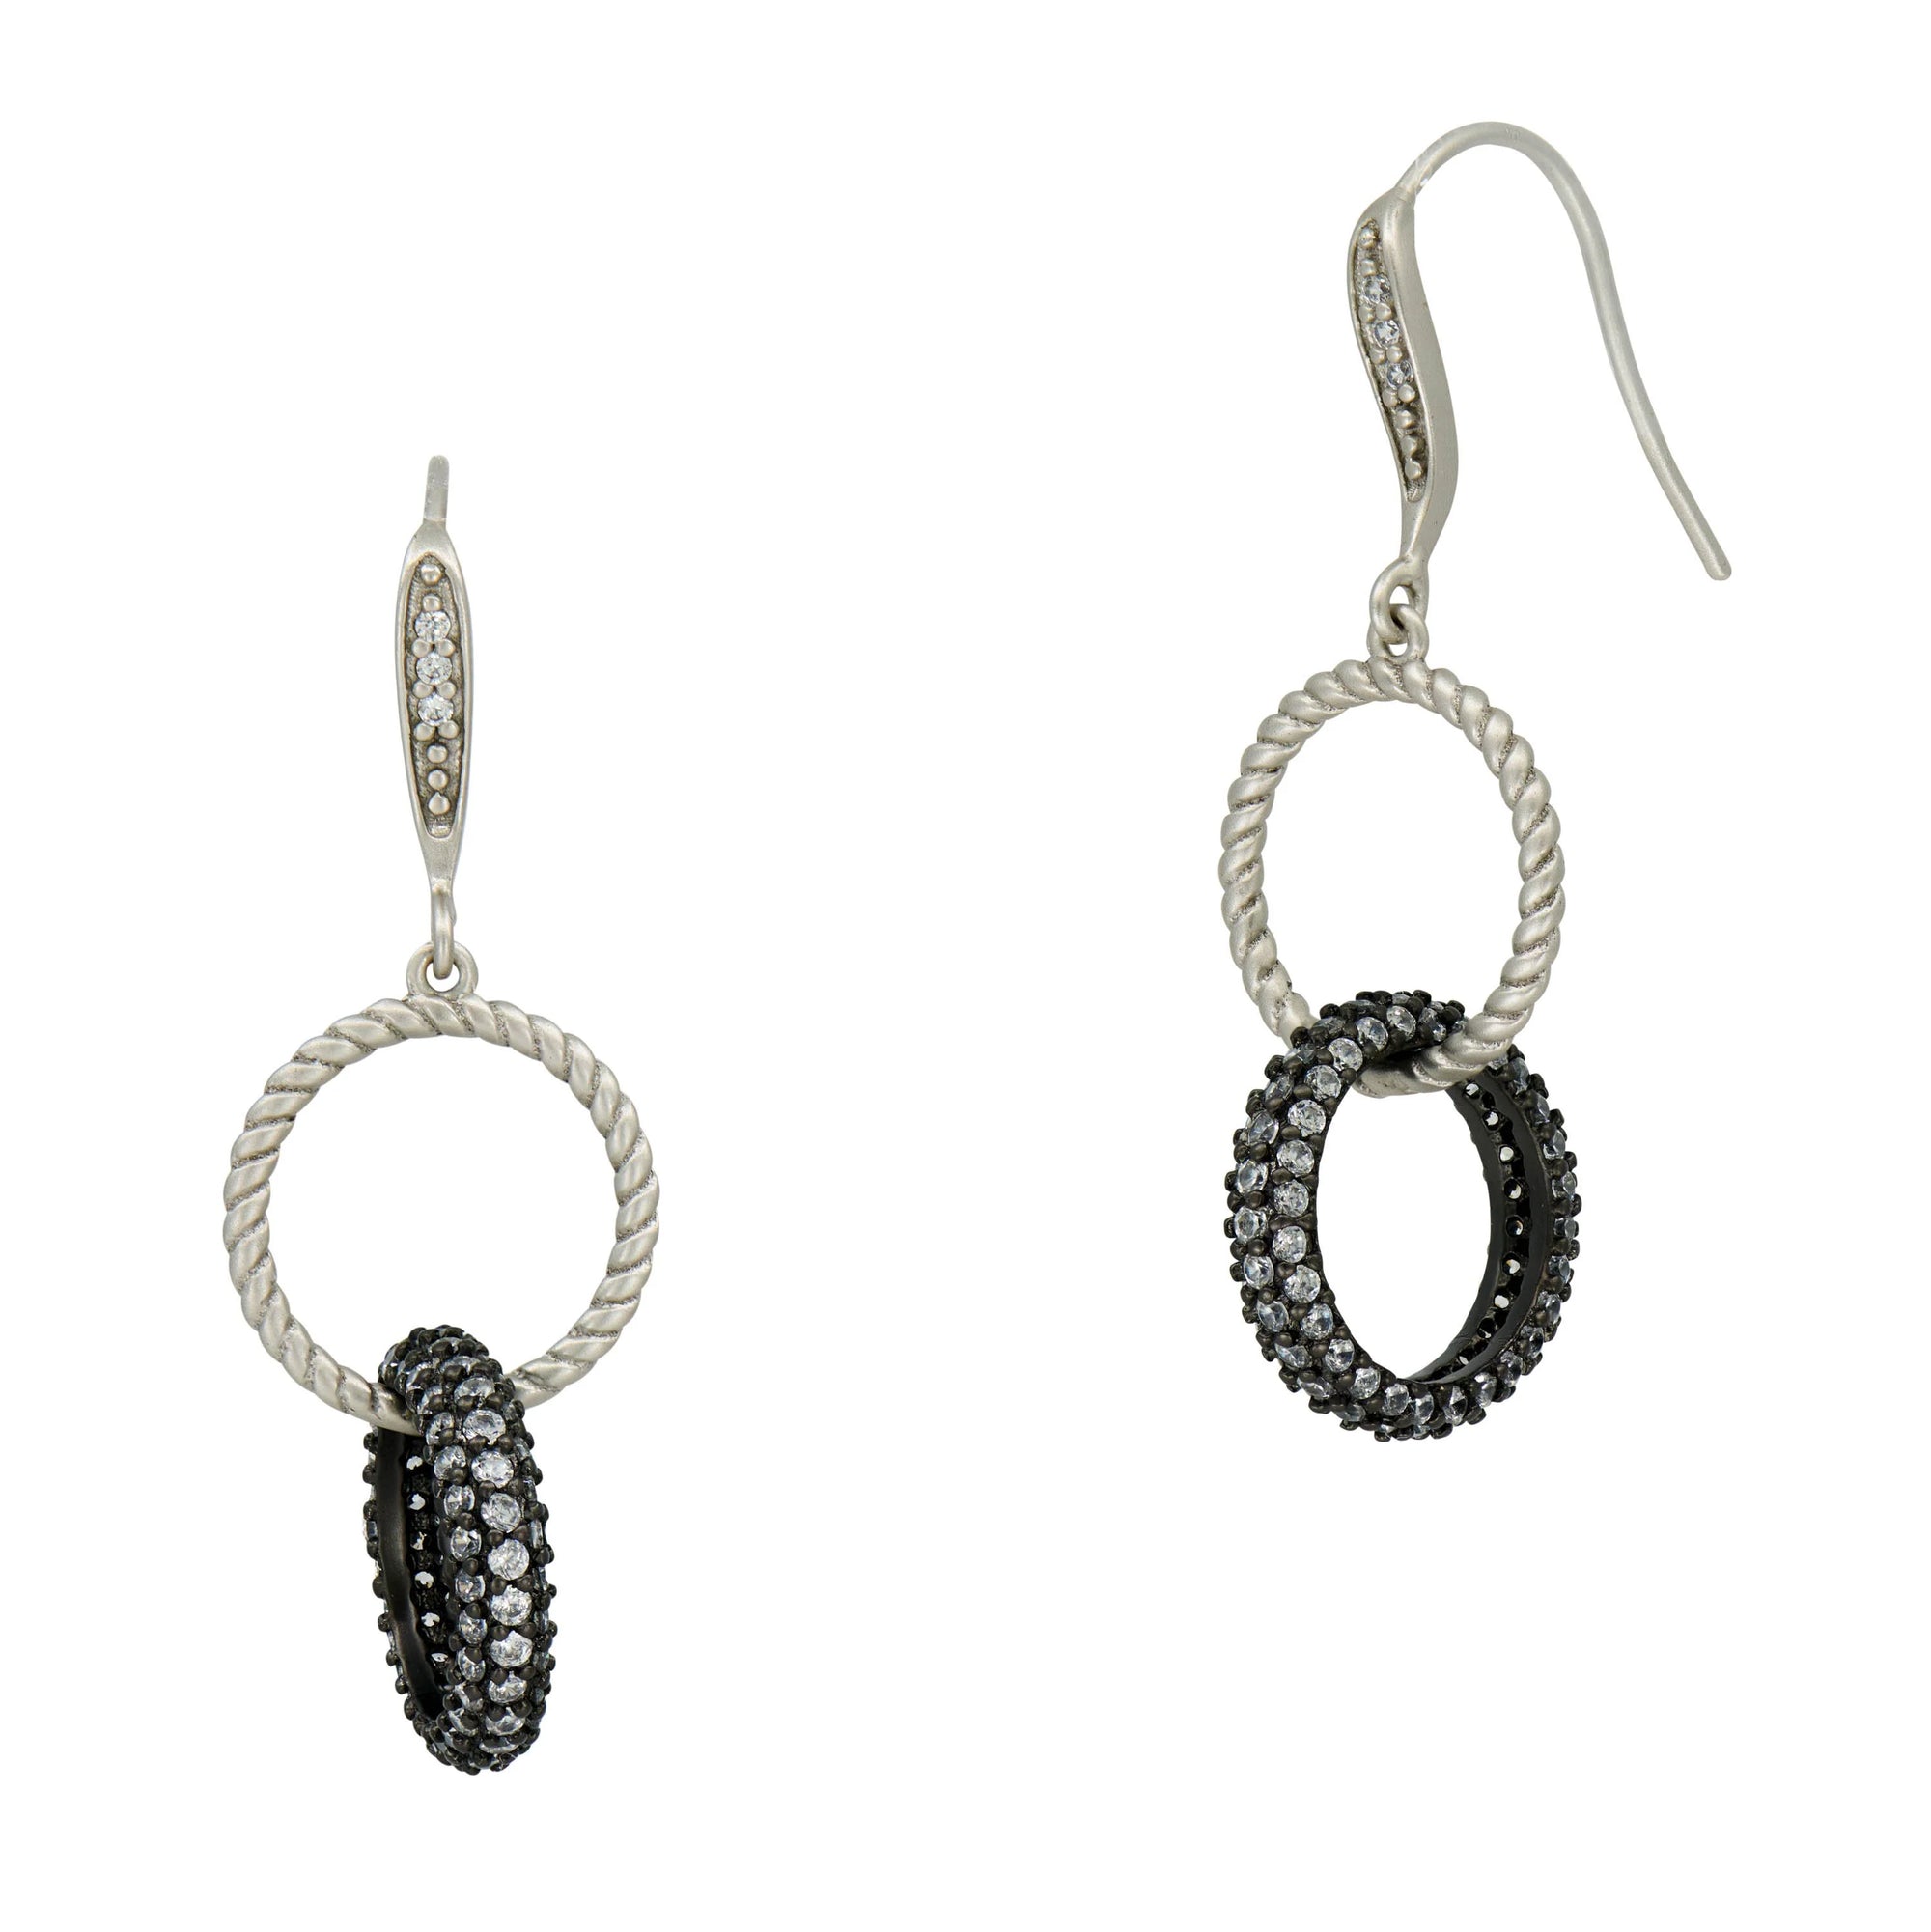 Freida Rothman "Twisted Cable Link Earring"